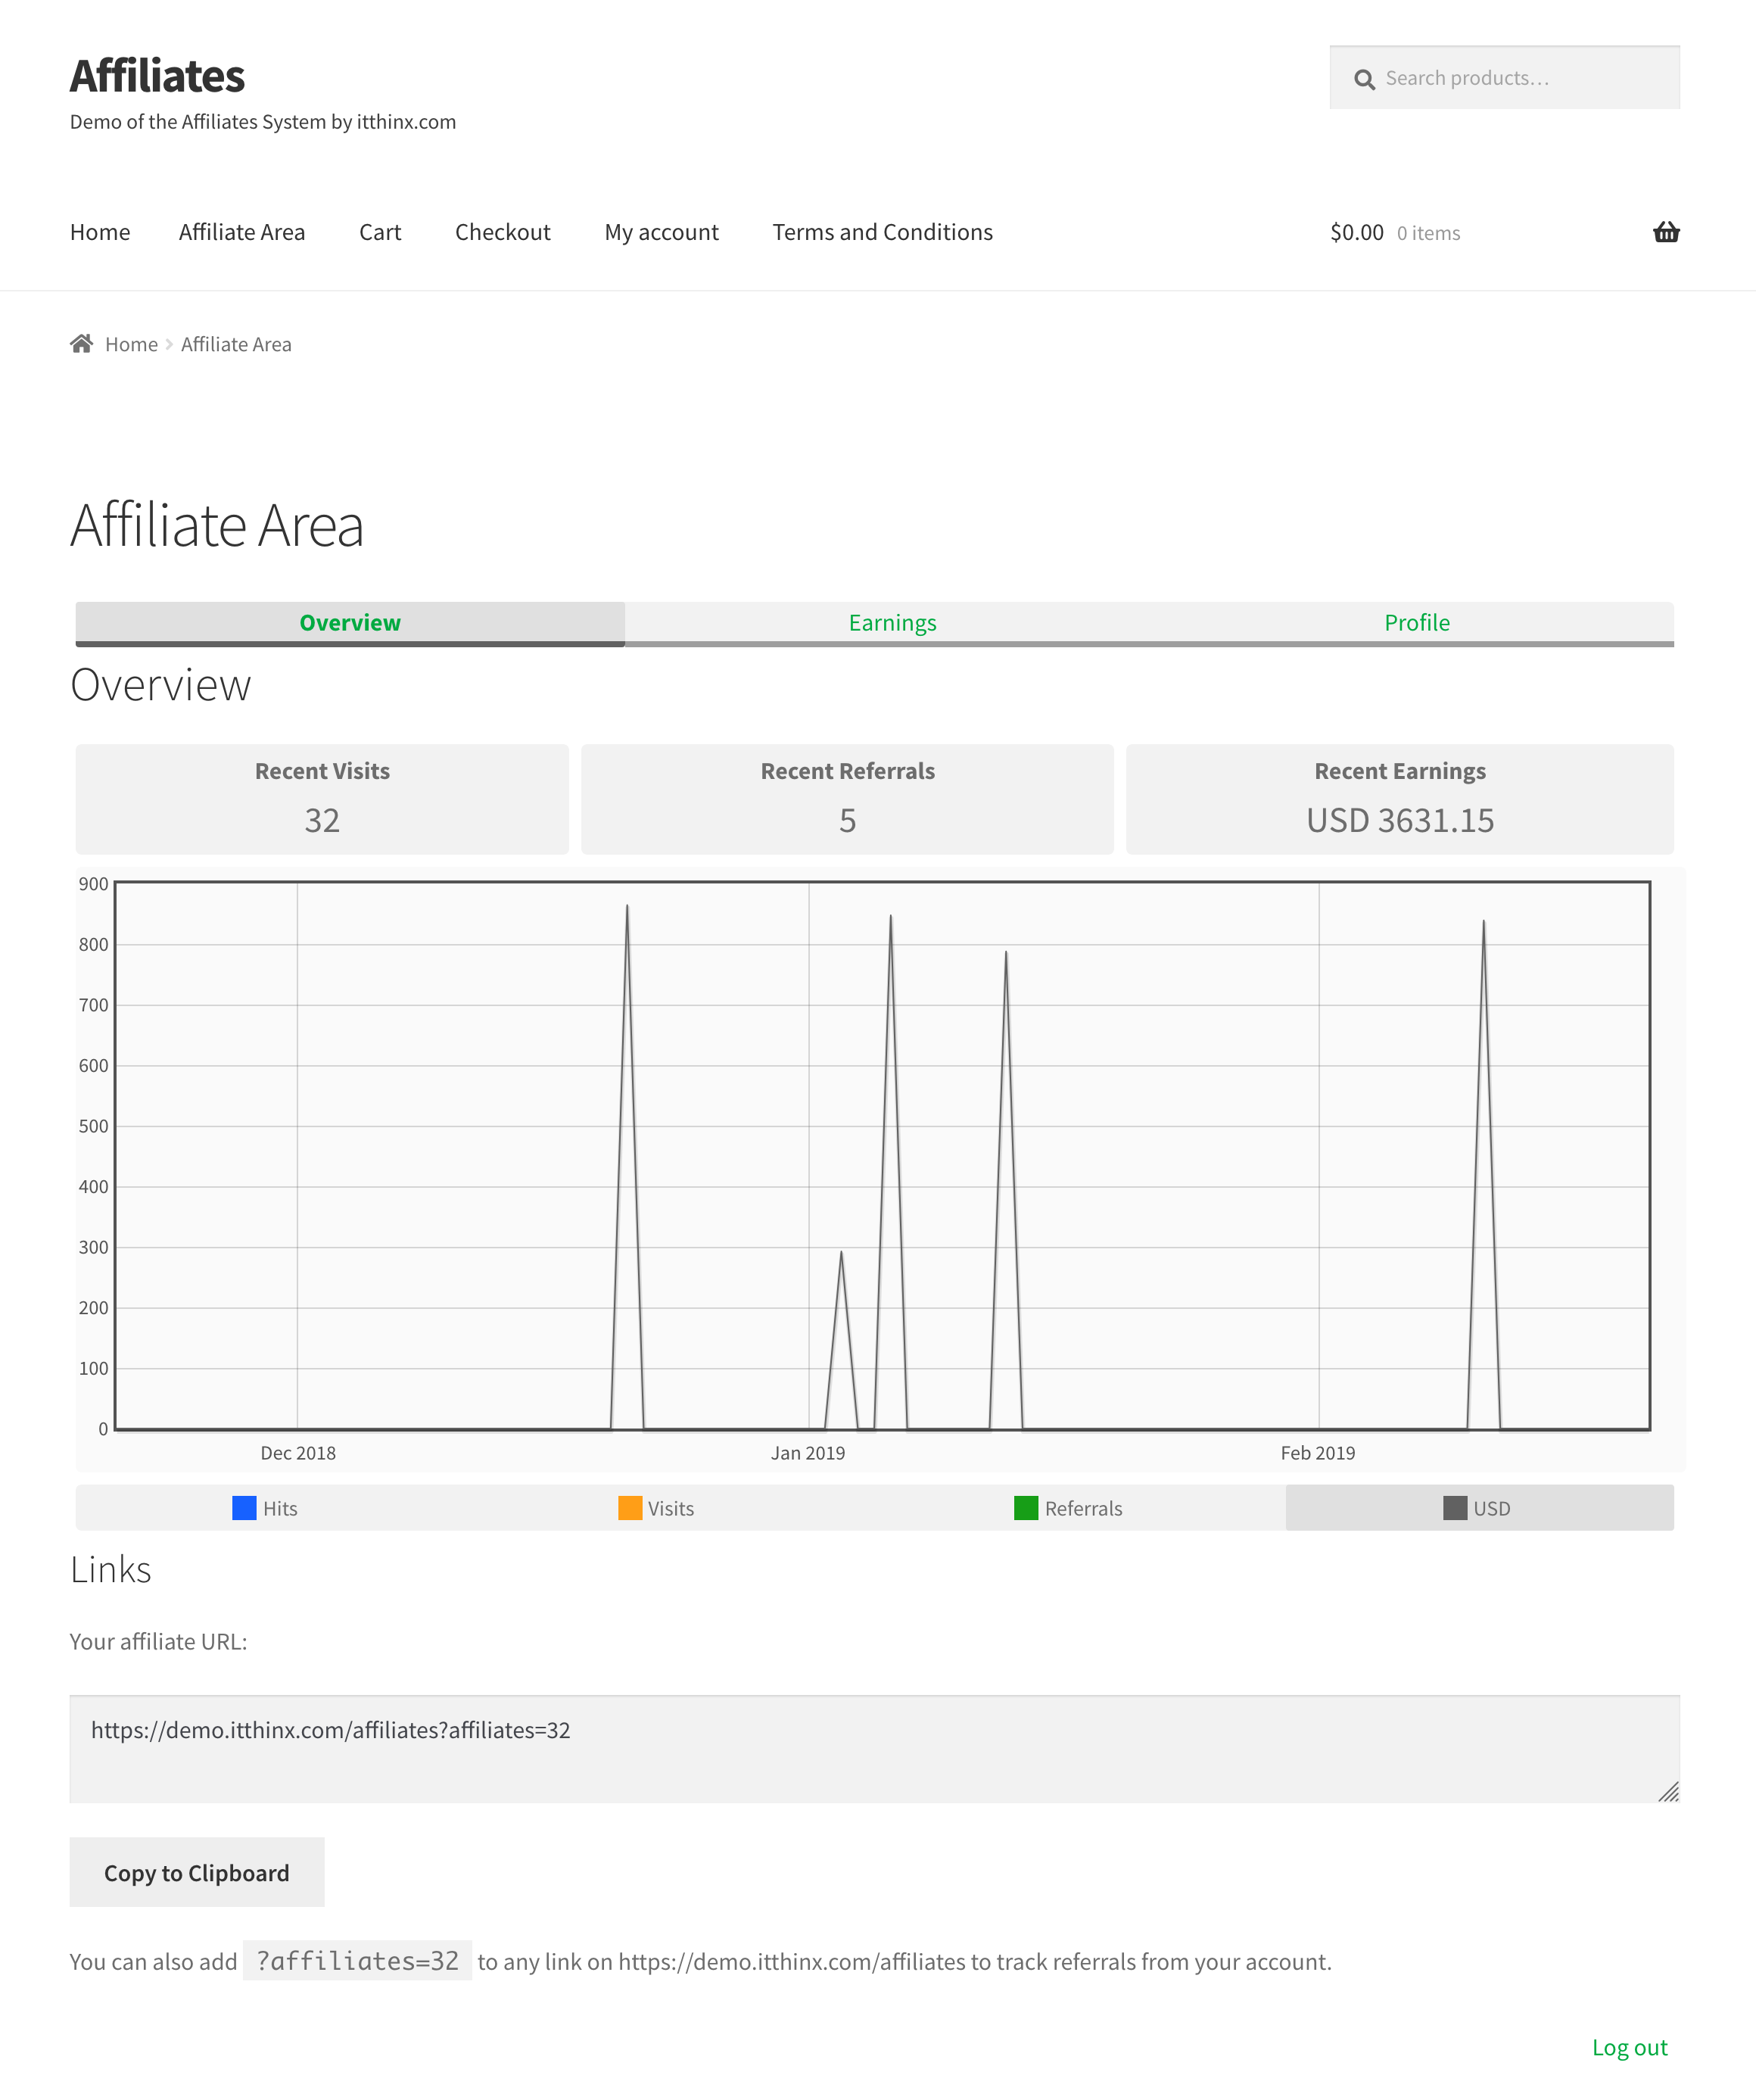 Affiliates Overview - Shows summarized information based on current and historic data to the Affiliate Manager.